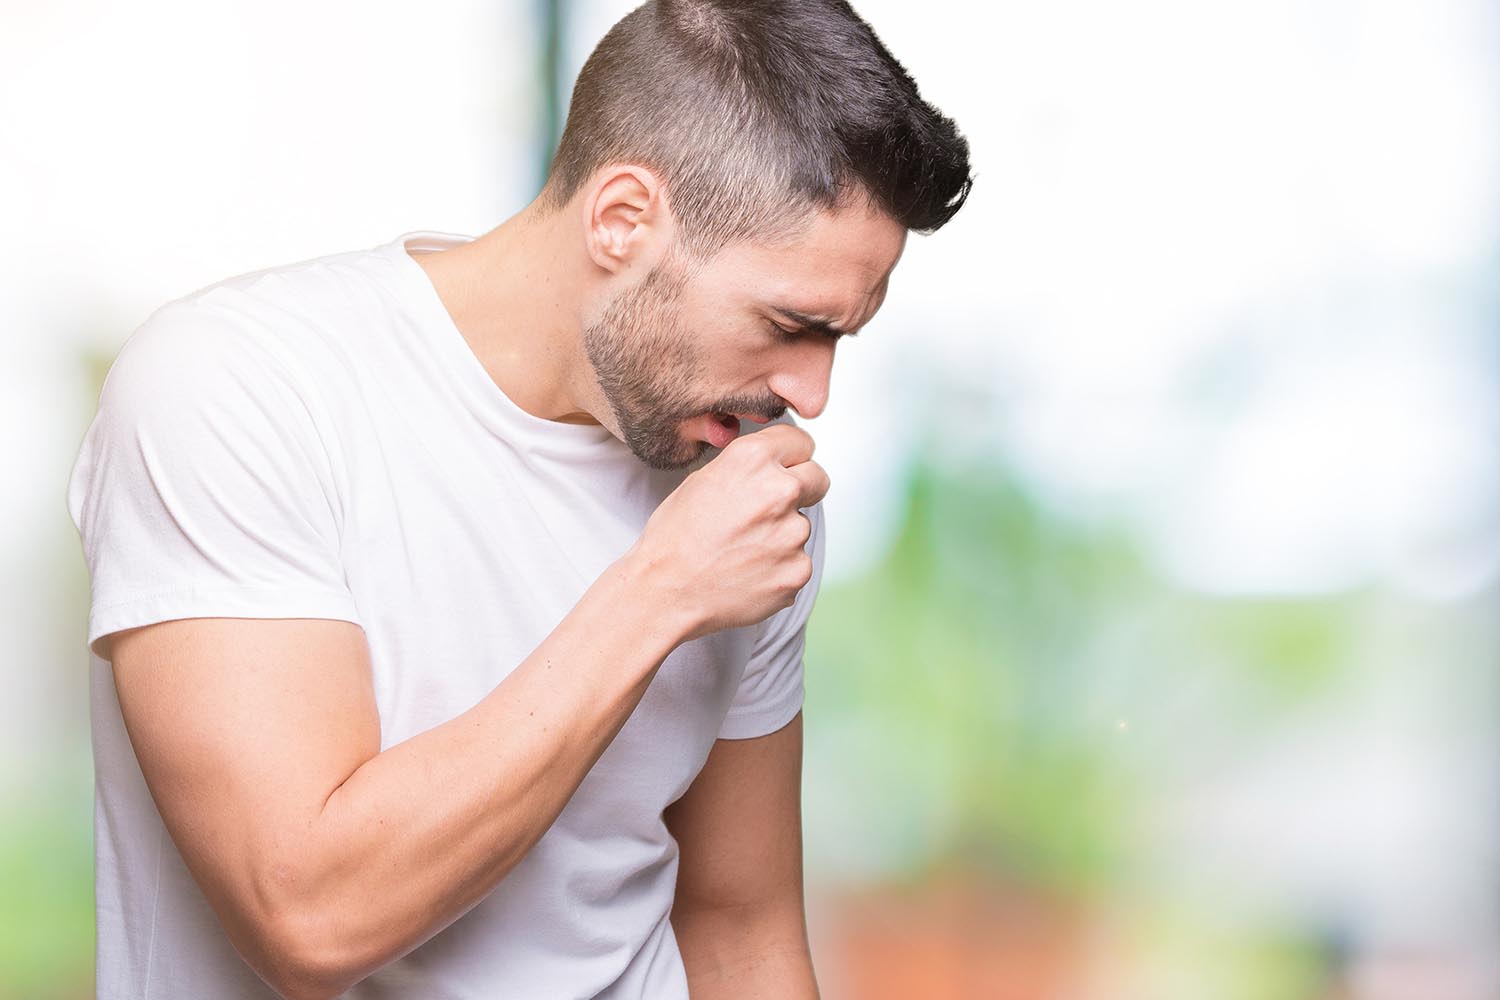 Learn about cough symptoms and treatments from AFC Urgent Care